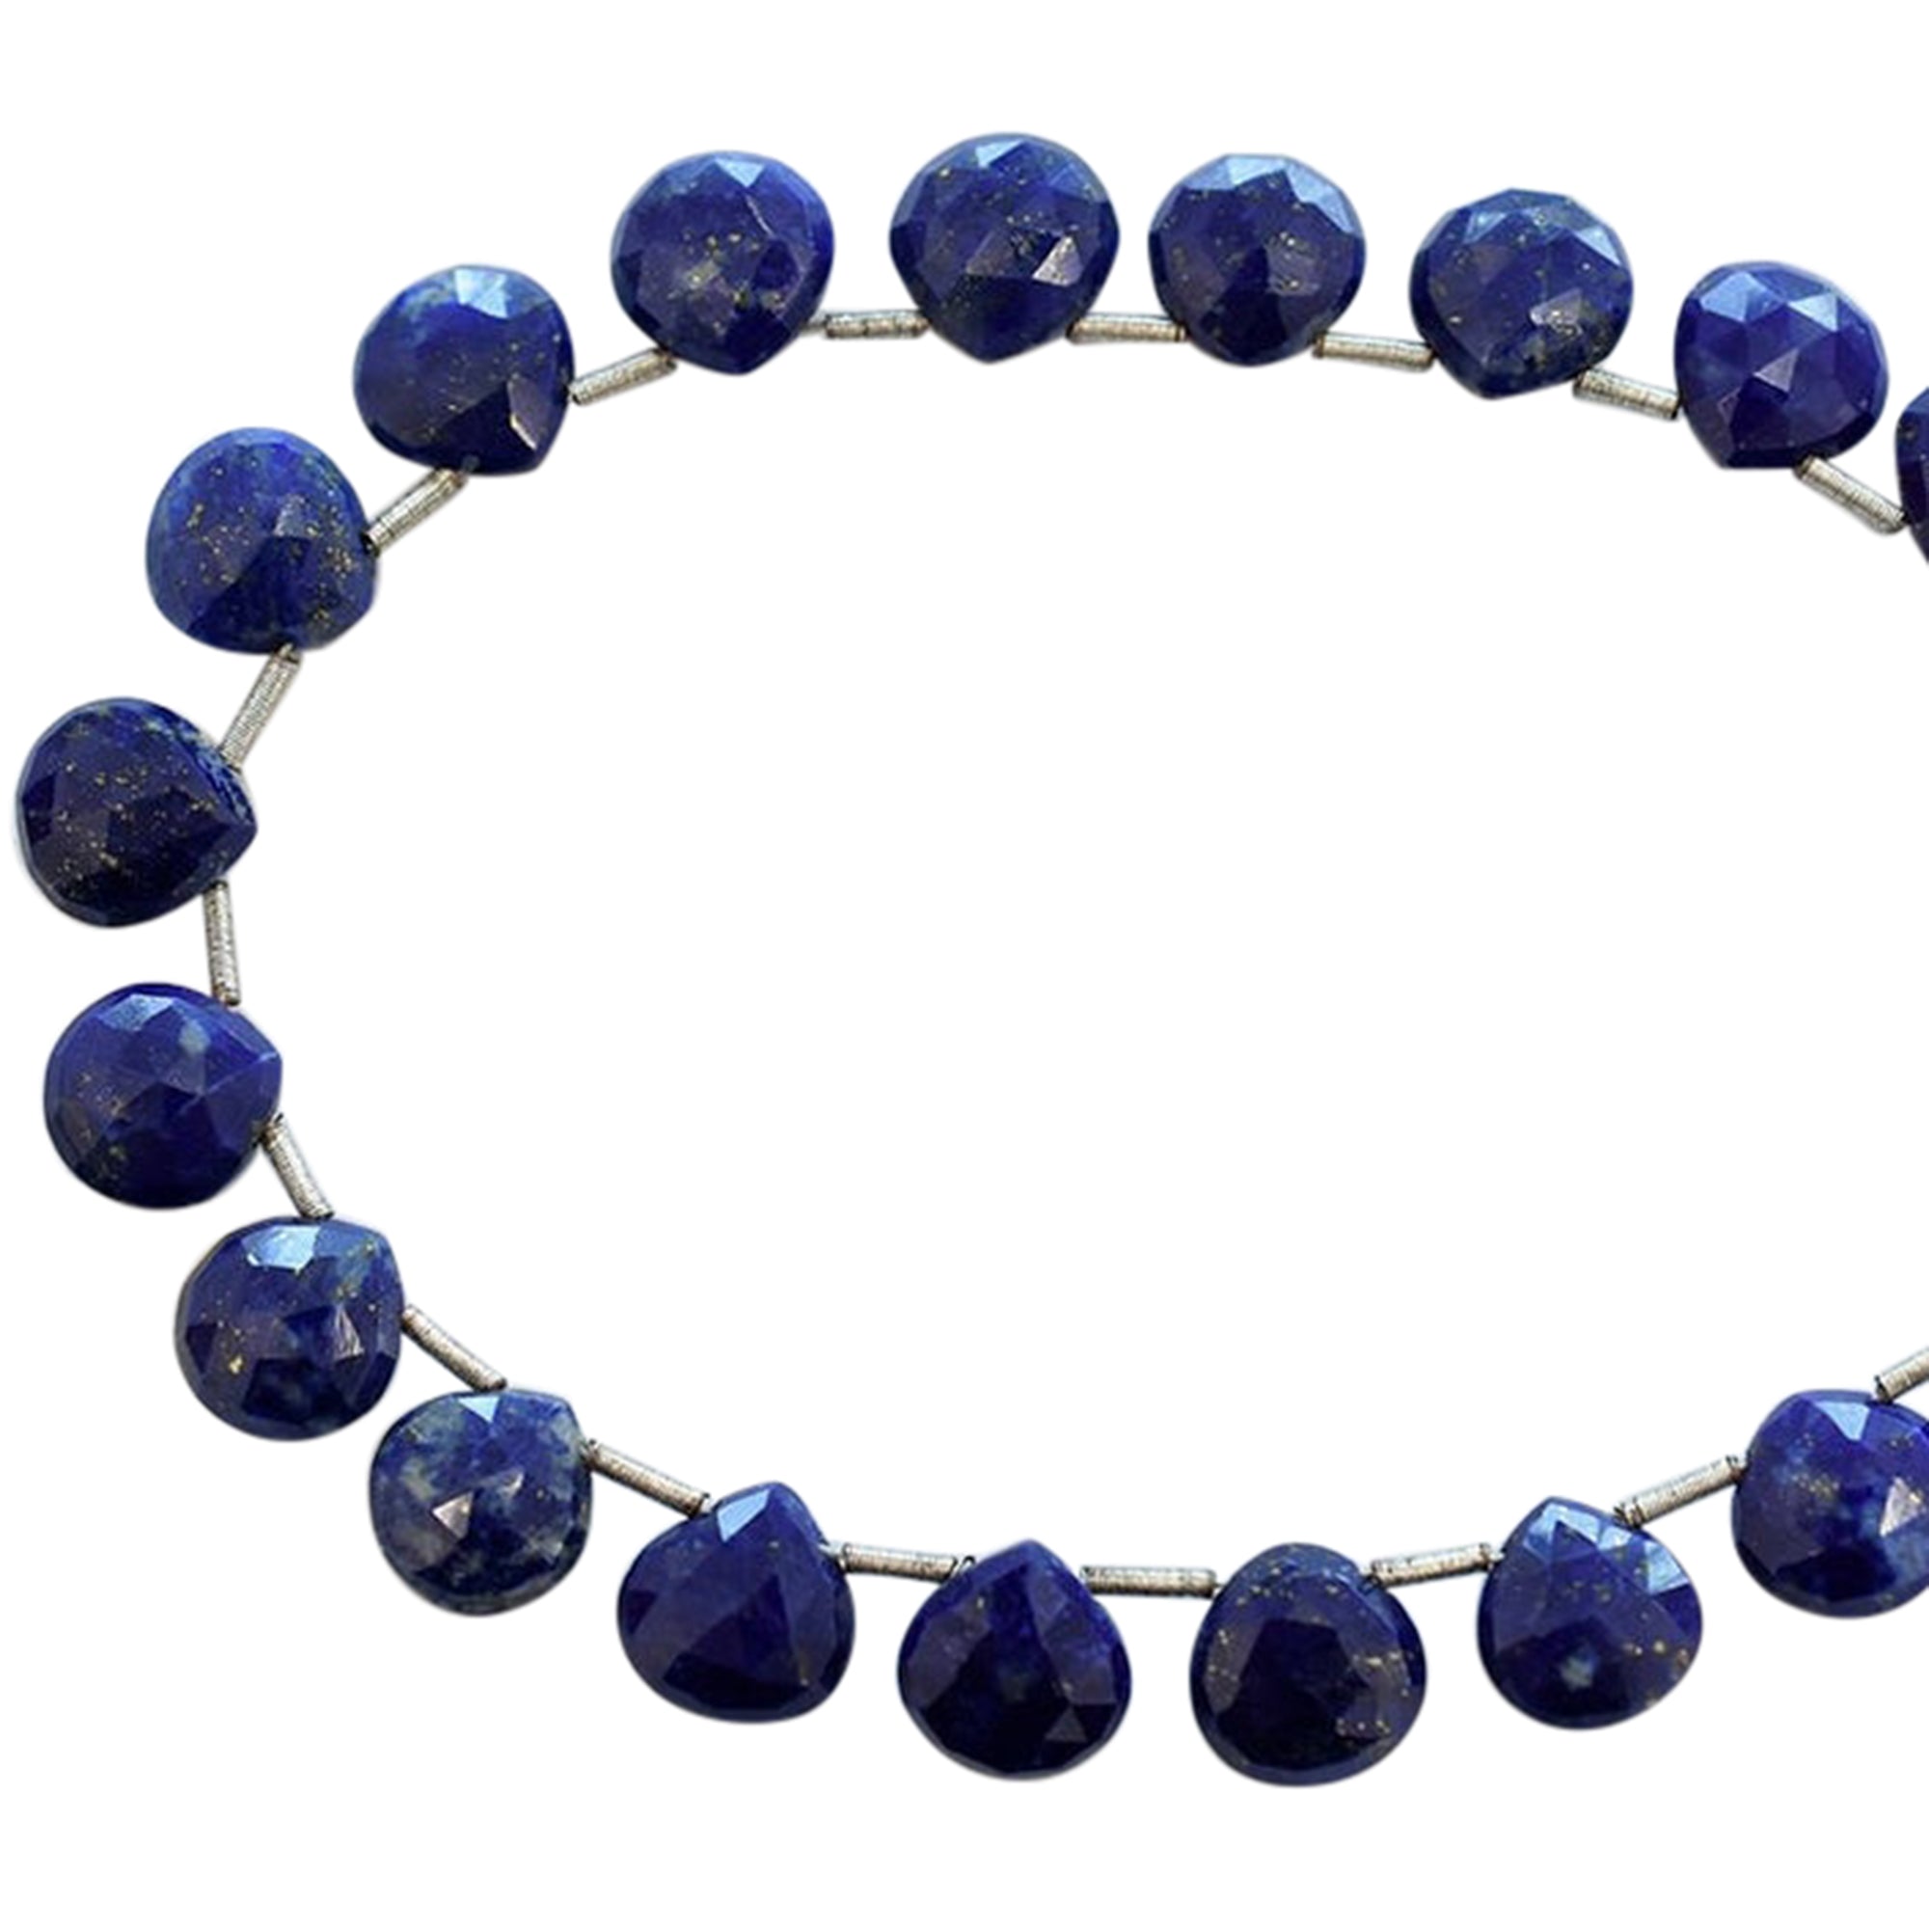 Lapis Lazuli 6.5 To 7 MM Faceted Heart Shape Beads Strand